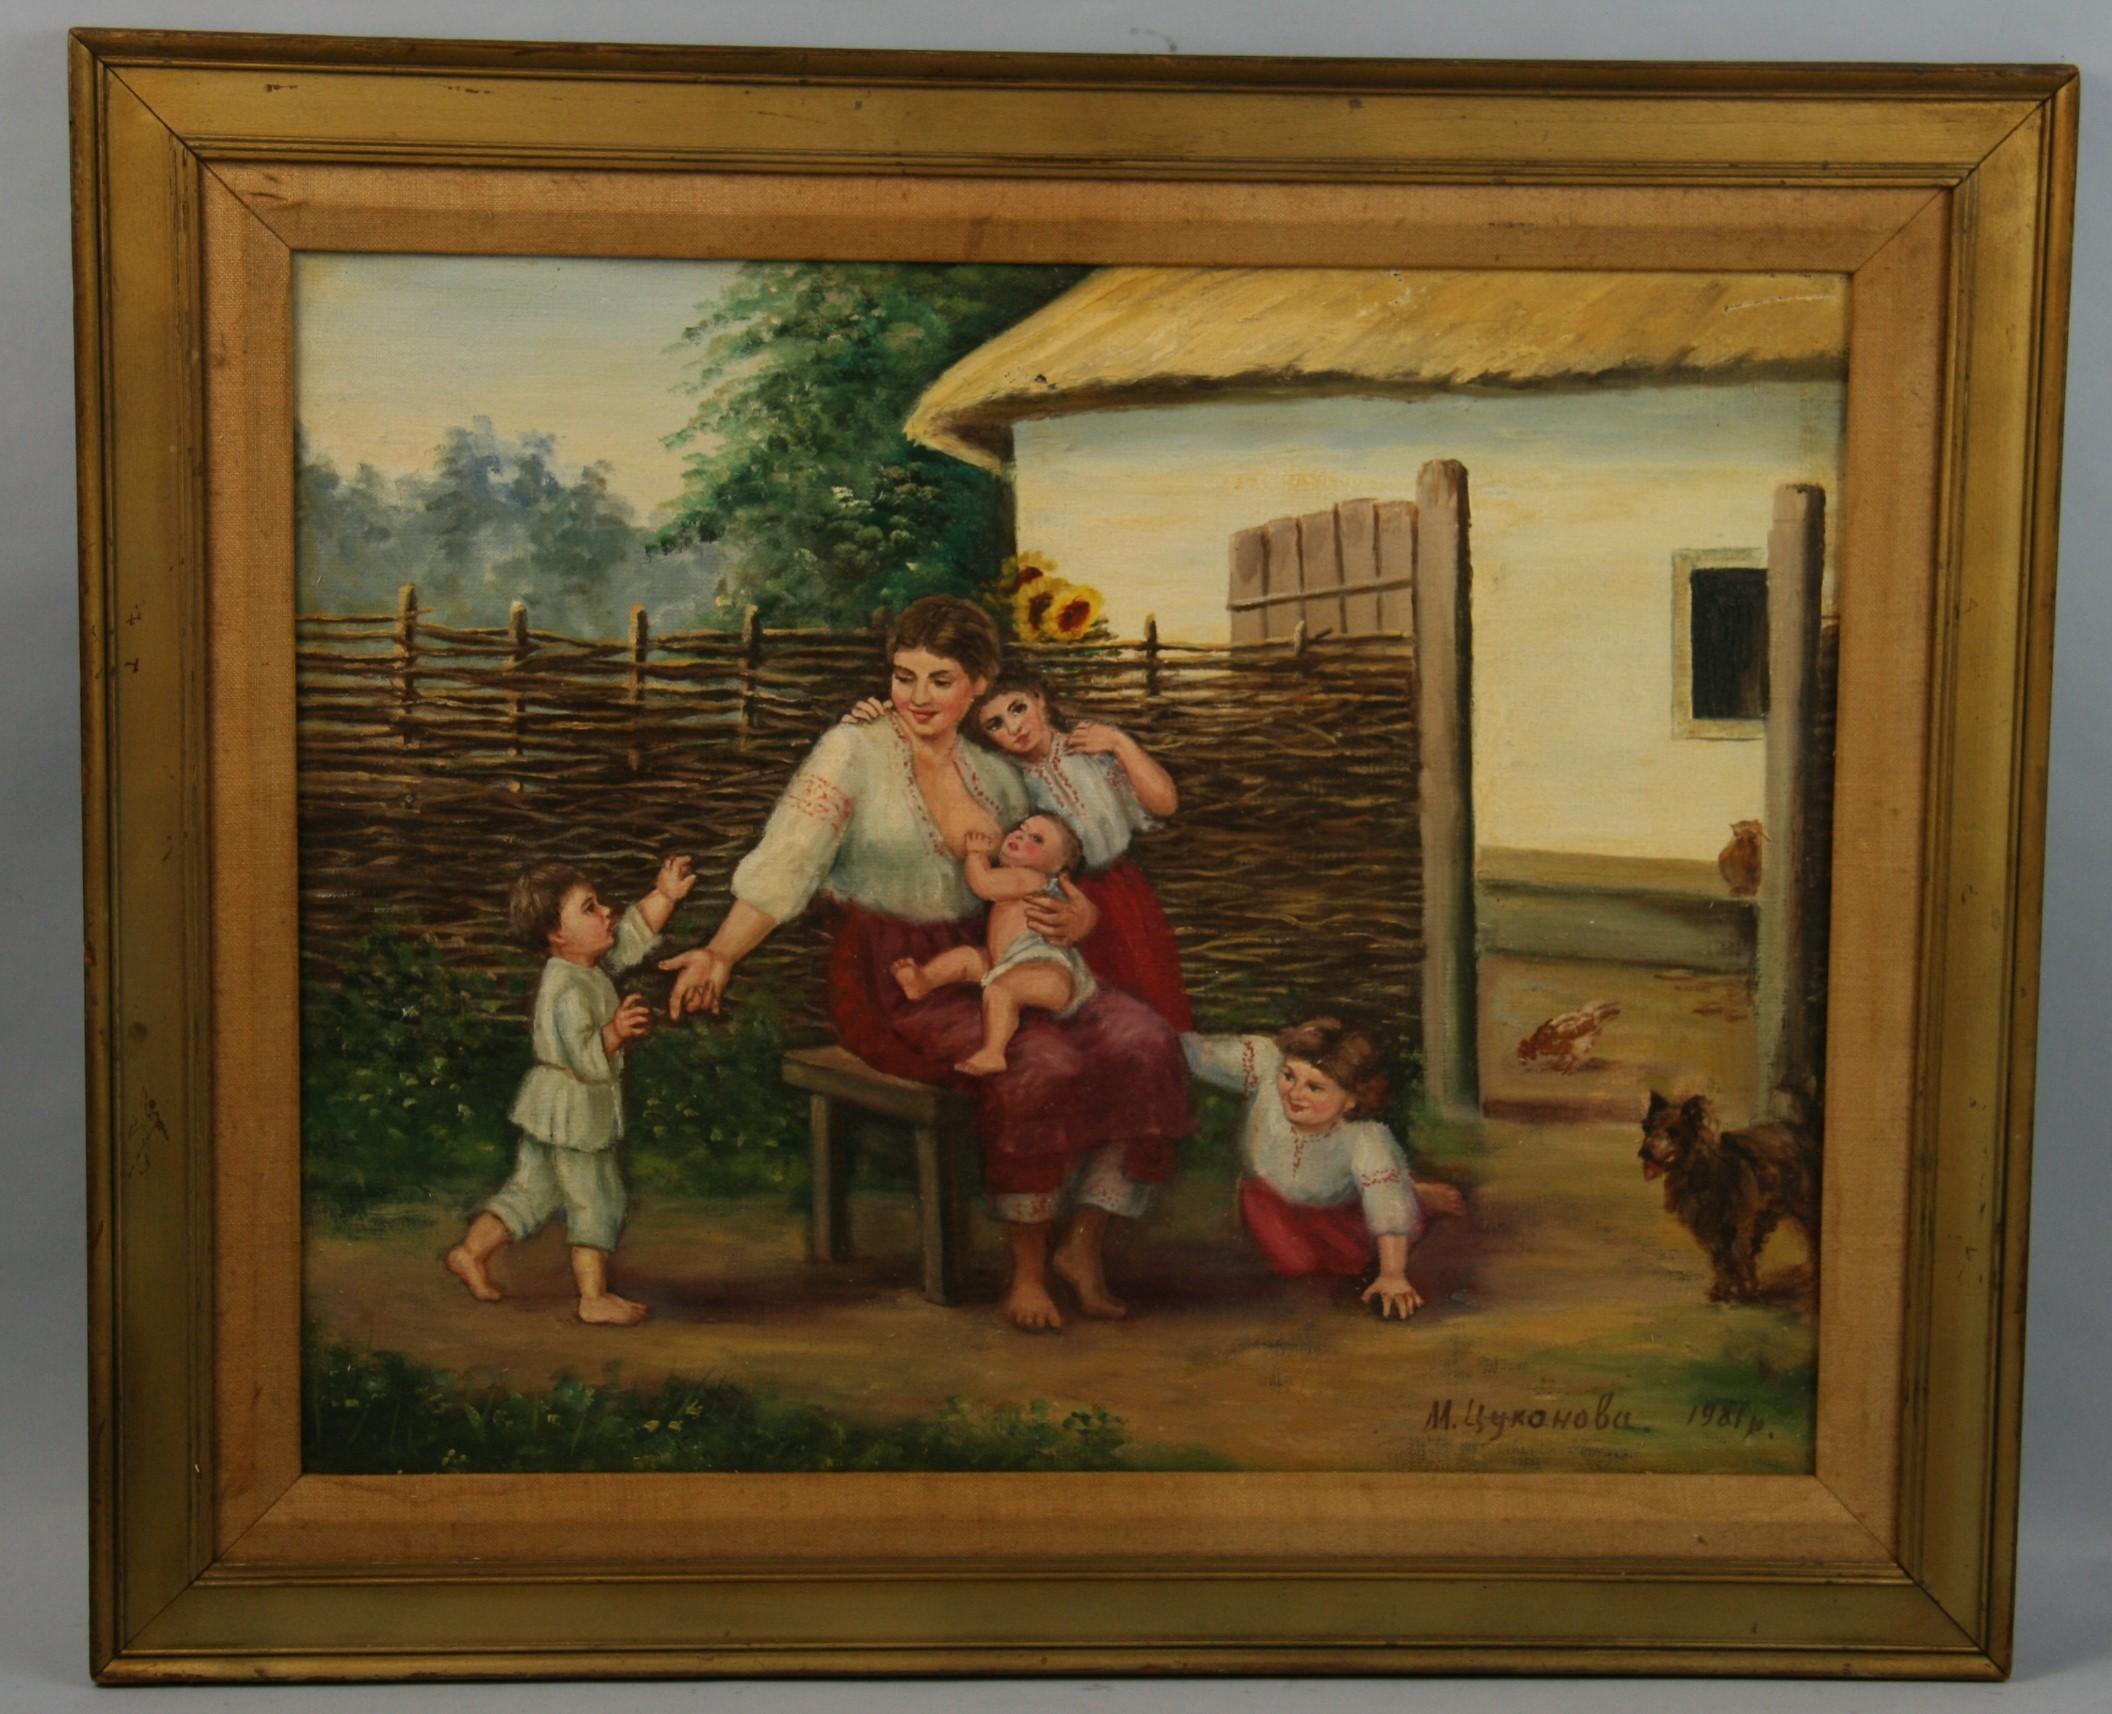 Vintage French Rural Family Farm Scene Oil Painting on Canvas 1981 For Sale 1